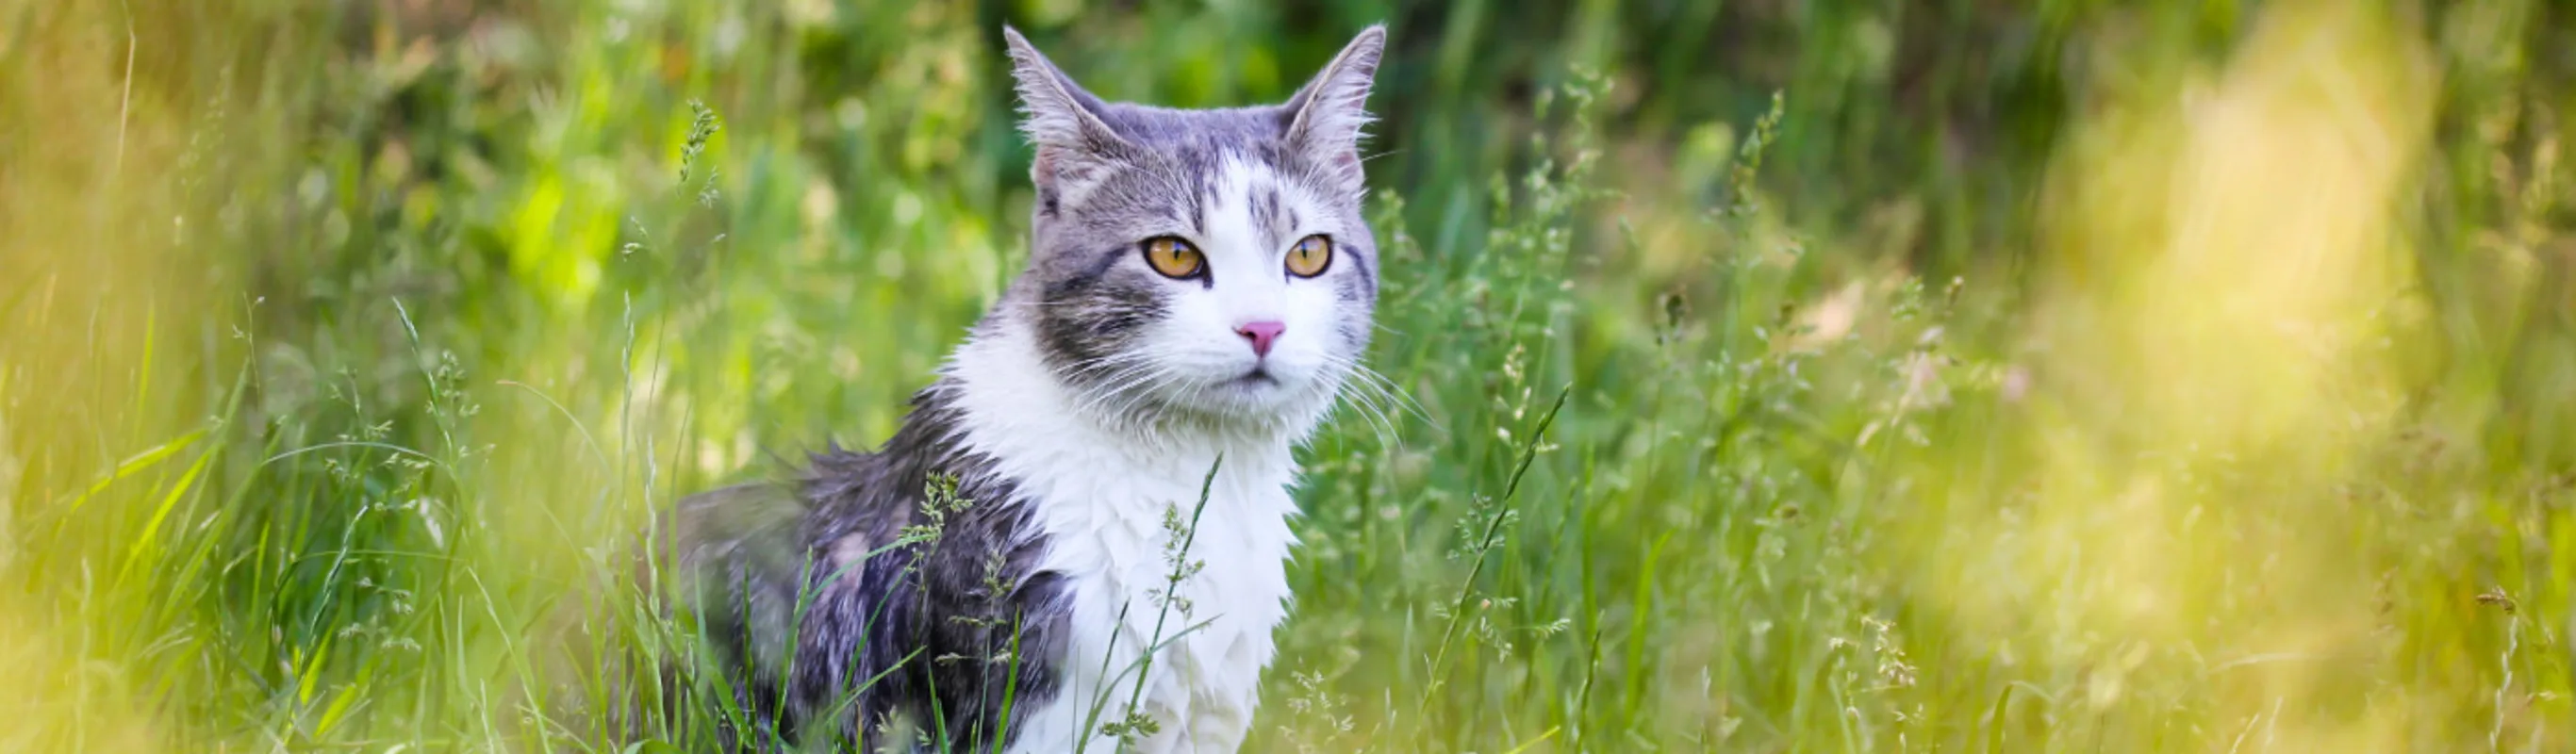 Gray Cat Standing in a Field of Grass